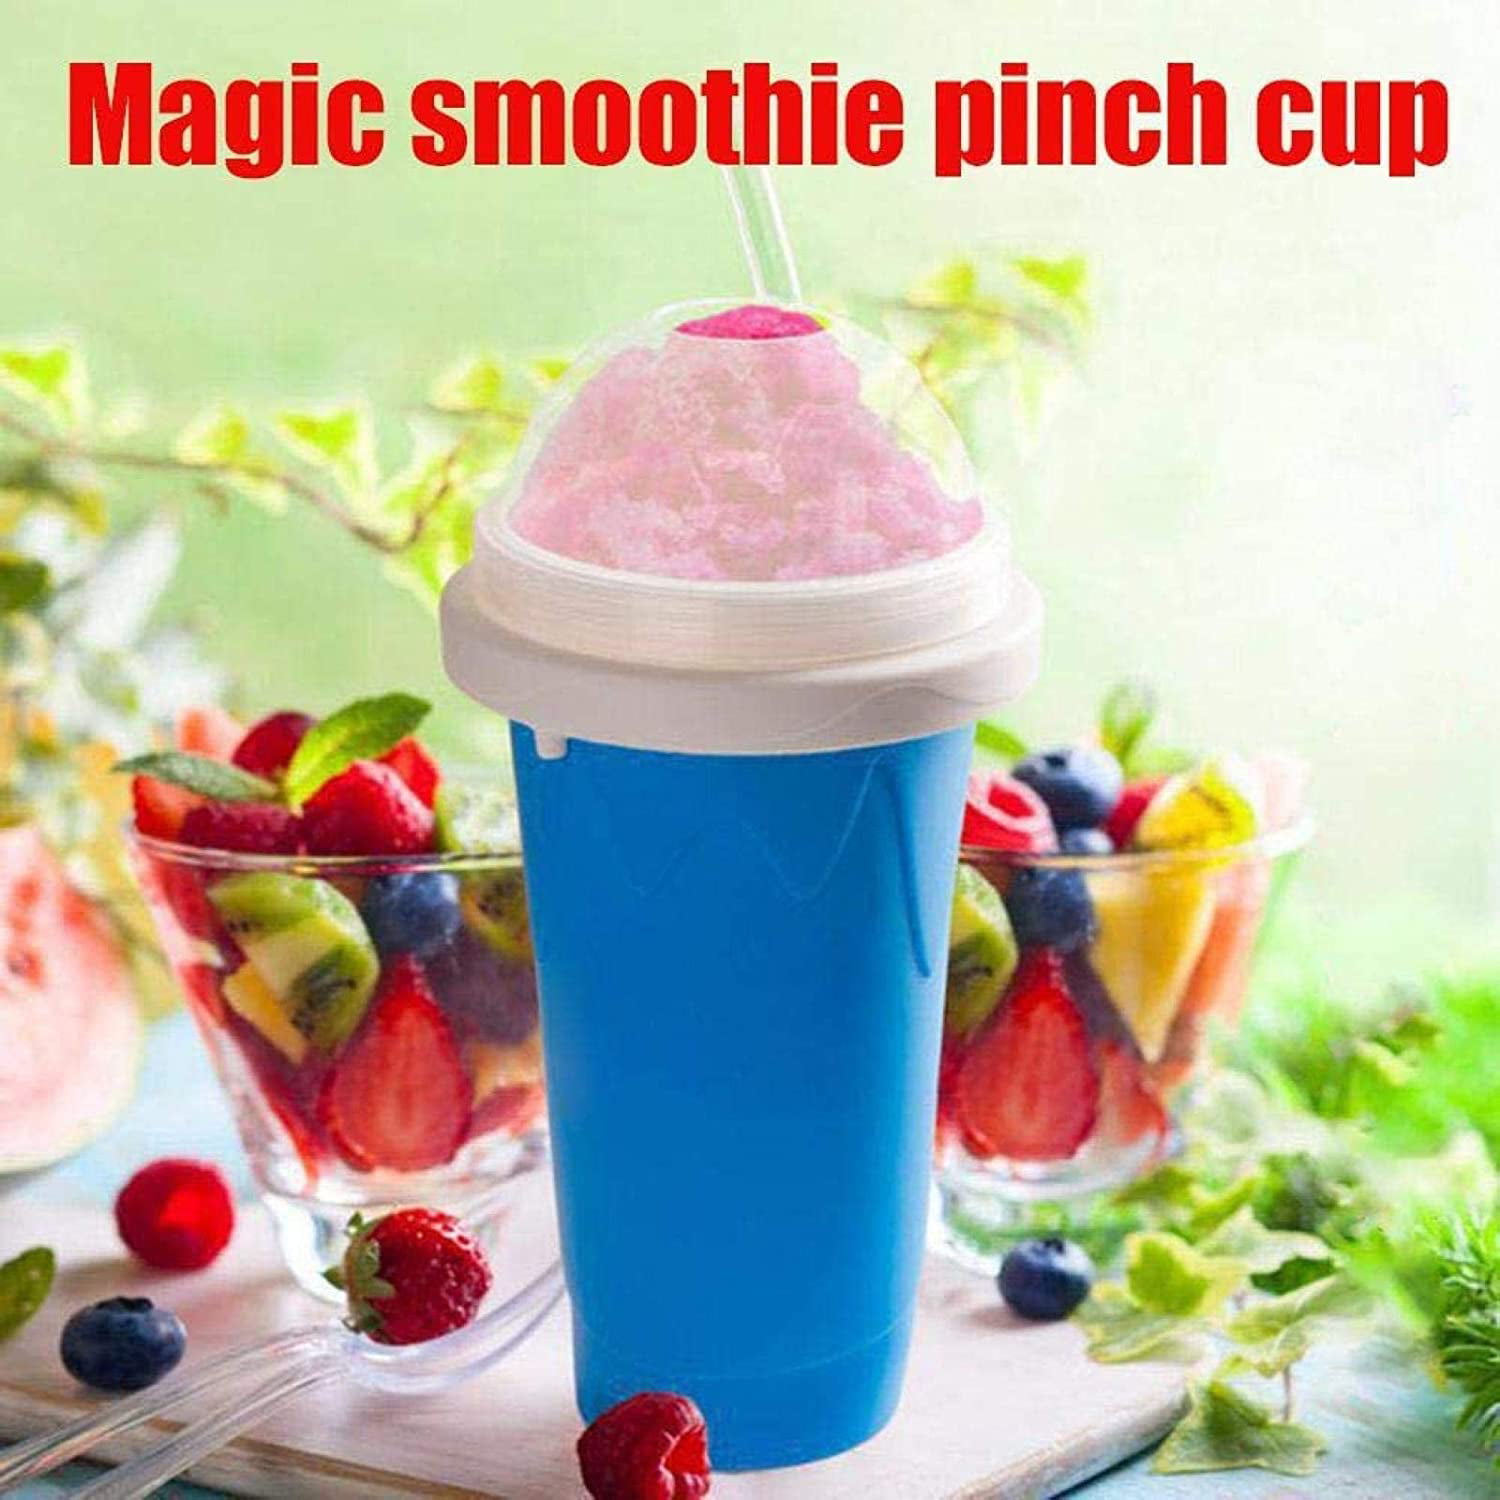 Hot Summer Cooler Smoothie Making Cup for Kids 4pc Squeeze Cup Slushy Maker DIY Slushy Maker Ice Cup Portable Travel Ice Cup Double Layer Silica Cup Pinch Cup Magic Slushy Maker